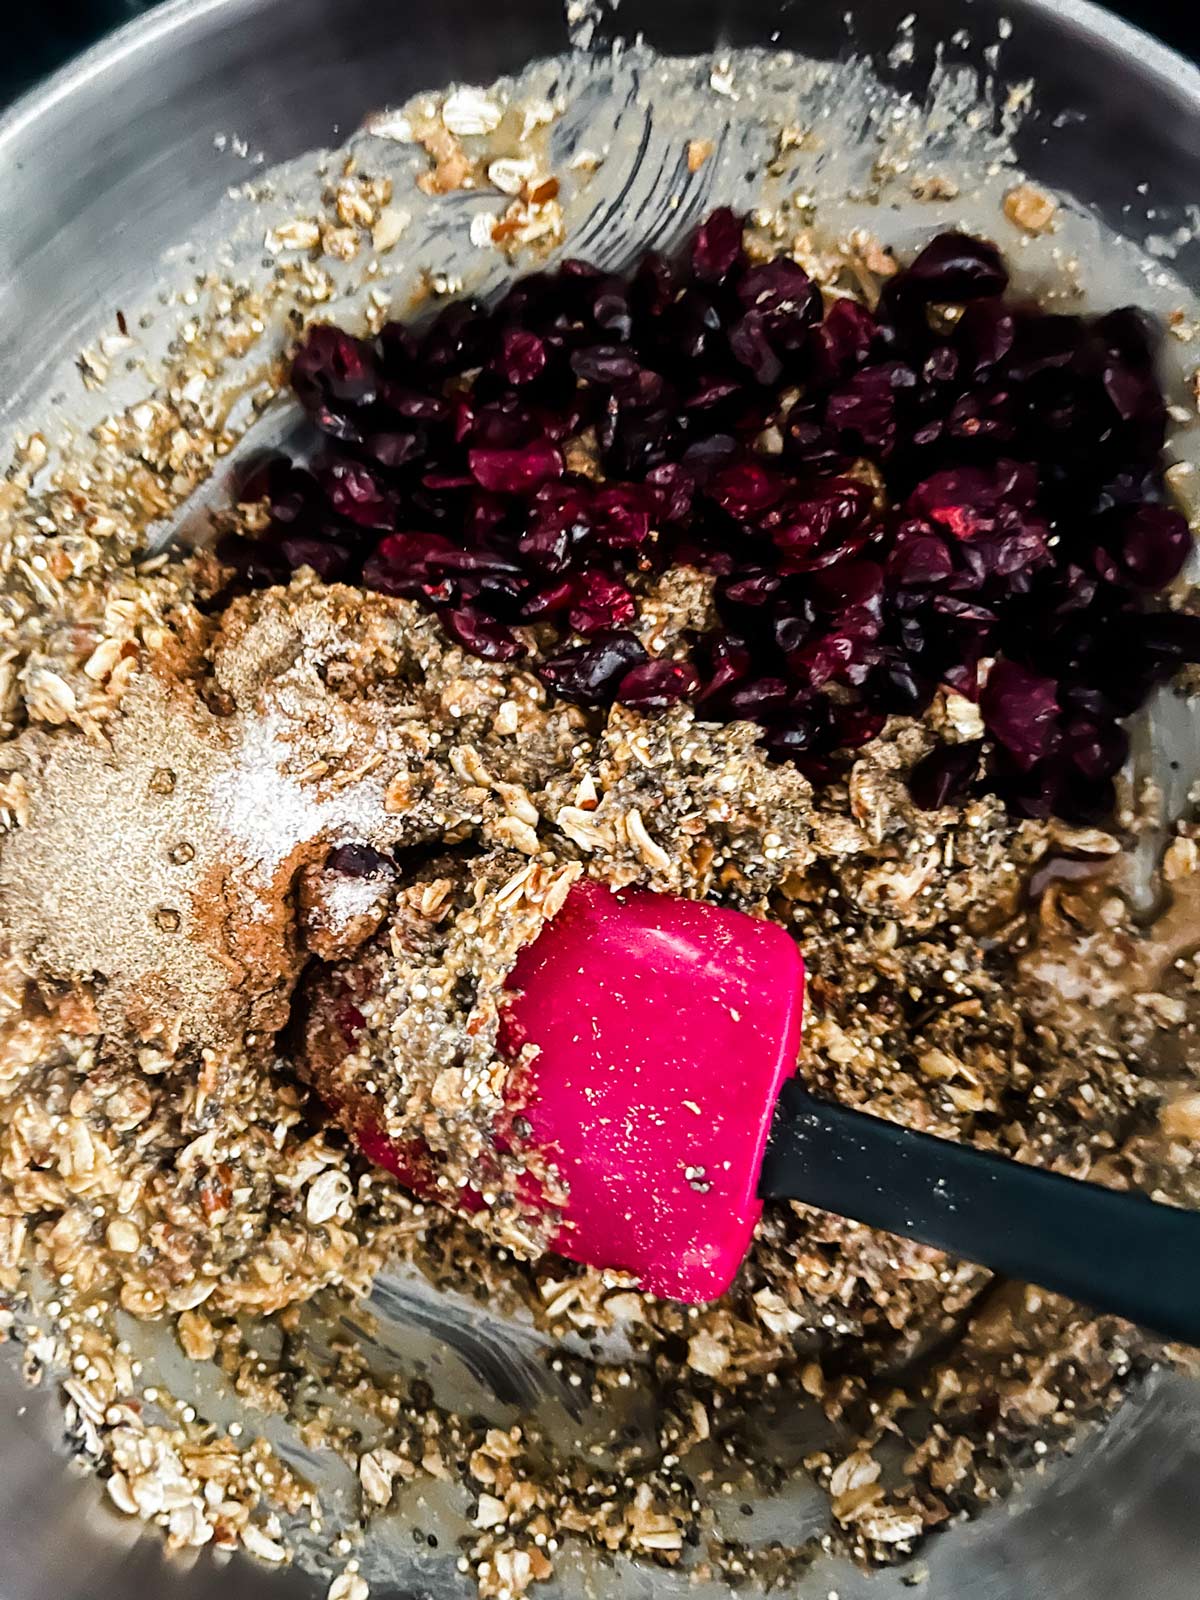 Honey, peanut butter, Quinoa, chia seeds, flax seeds, shredded coconut, oatmeal, and almonds that have just had cranberries added to it and are being stirred with a spatula.